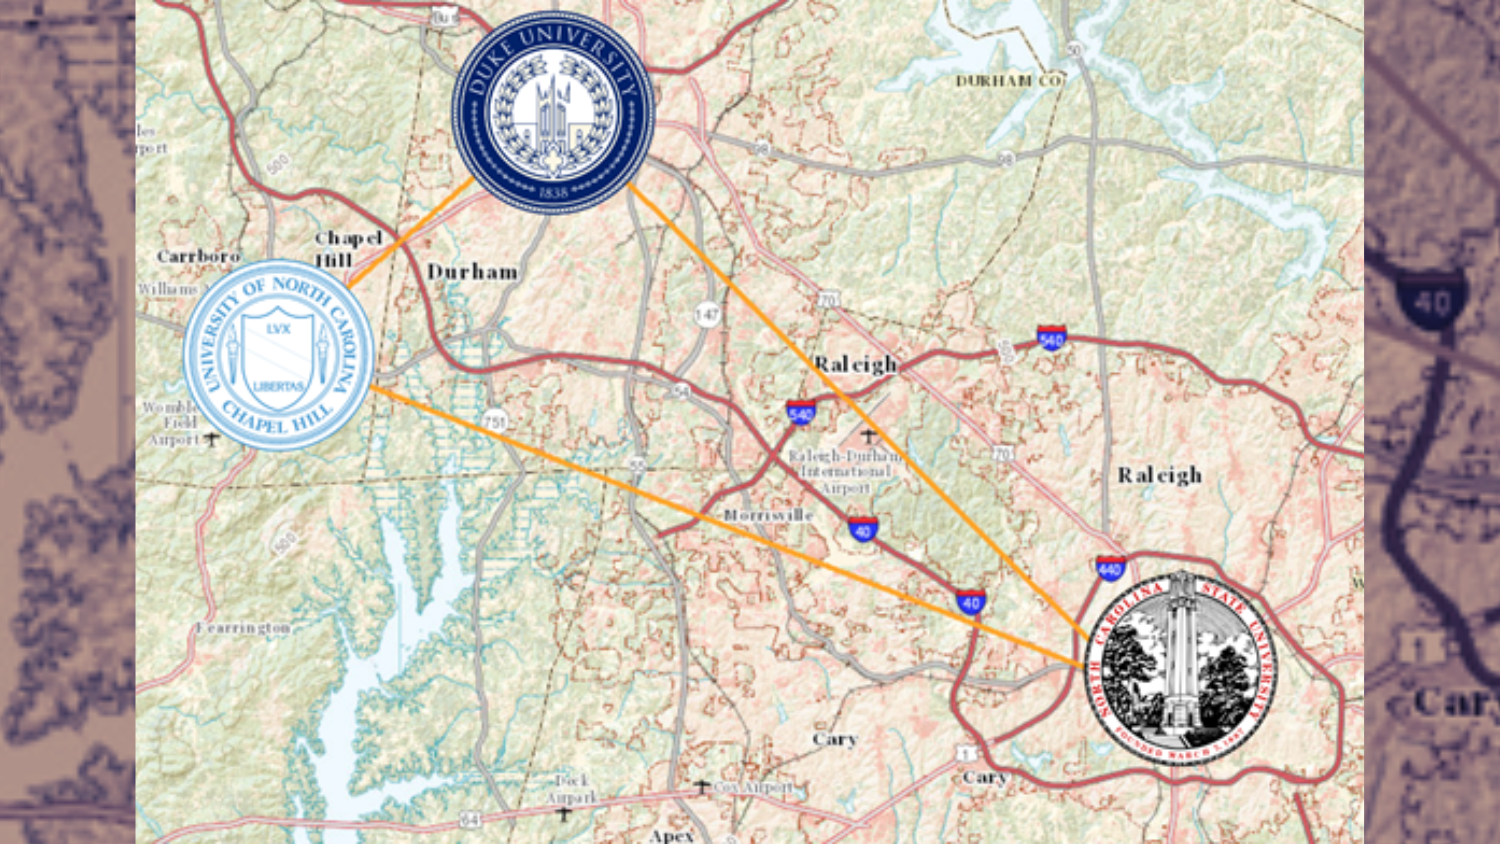 A map of 3 major universities within the Research Triangle: NC State, UNC-Chapel Hill, Duke.